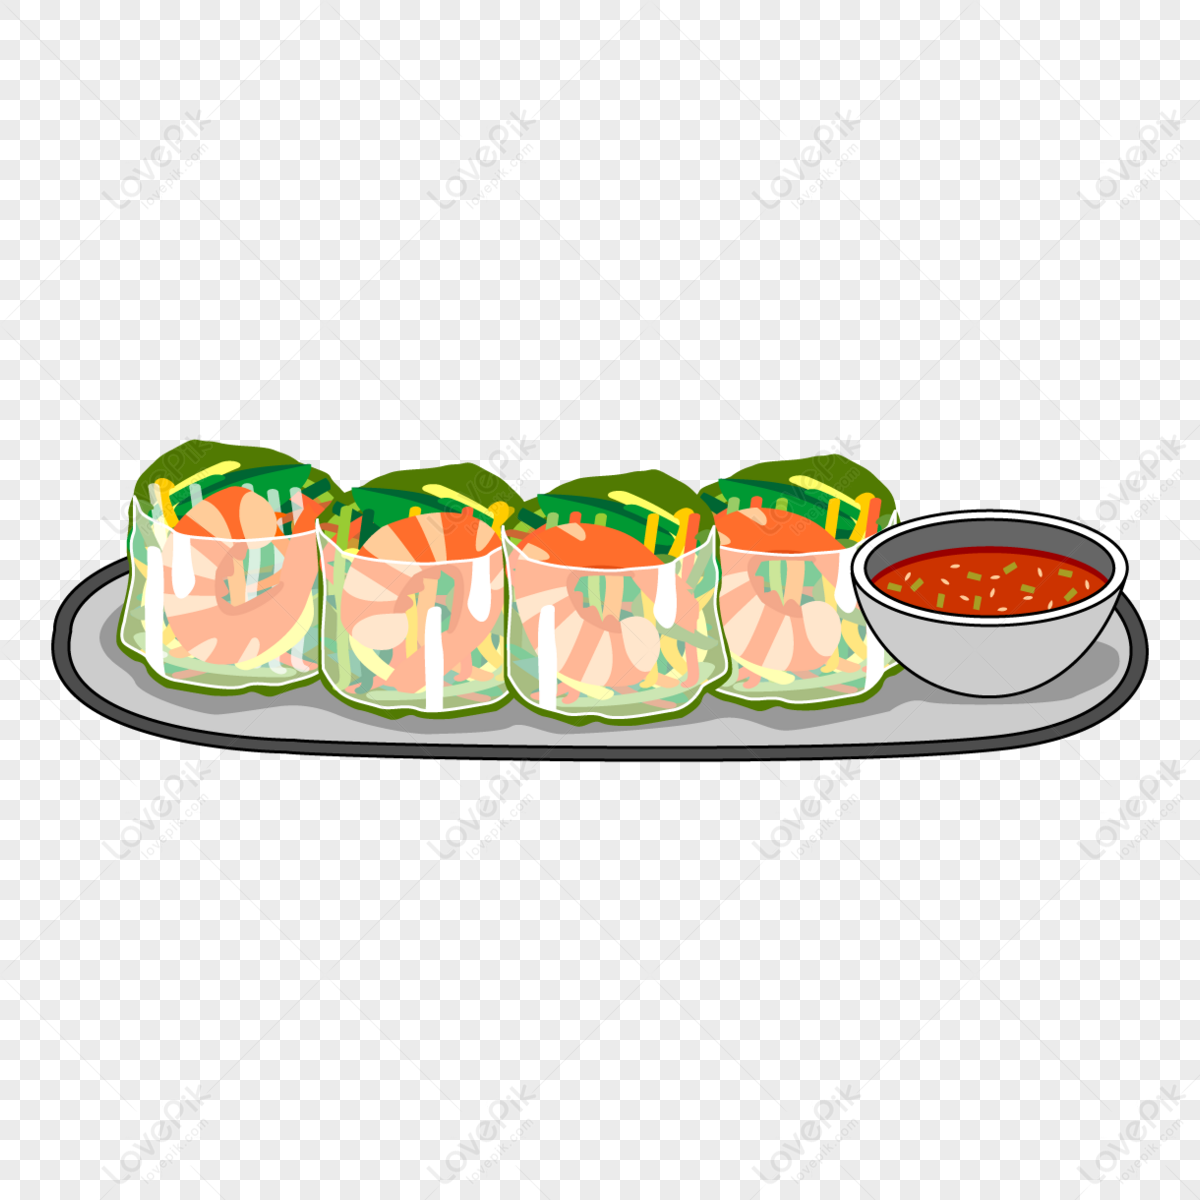 The delicacy and presentation of Vietnamese spring rolls,shrimp and vegetable ingredients,snack png image free download